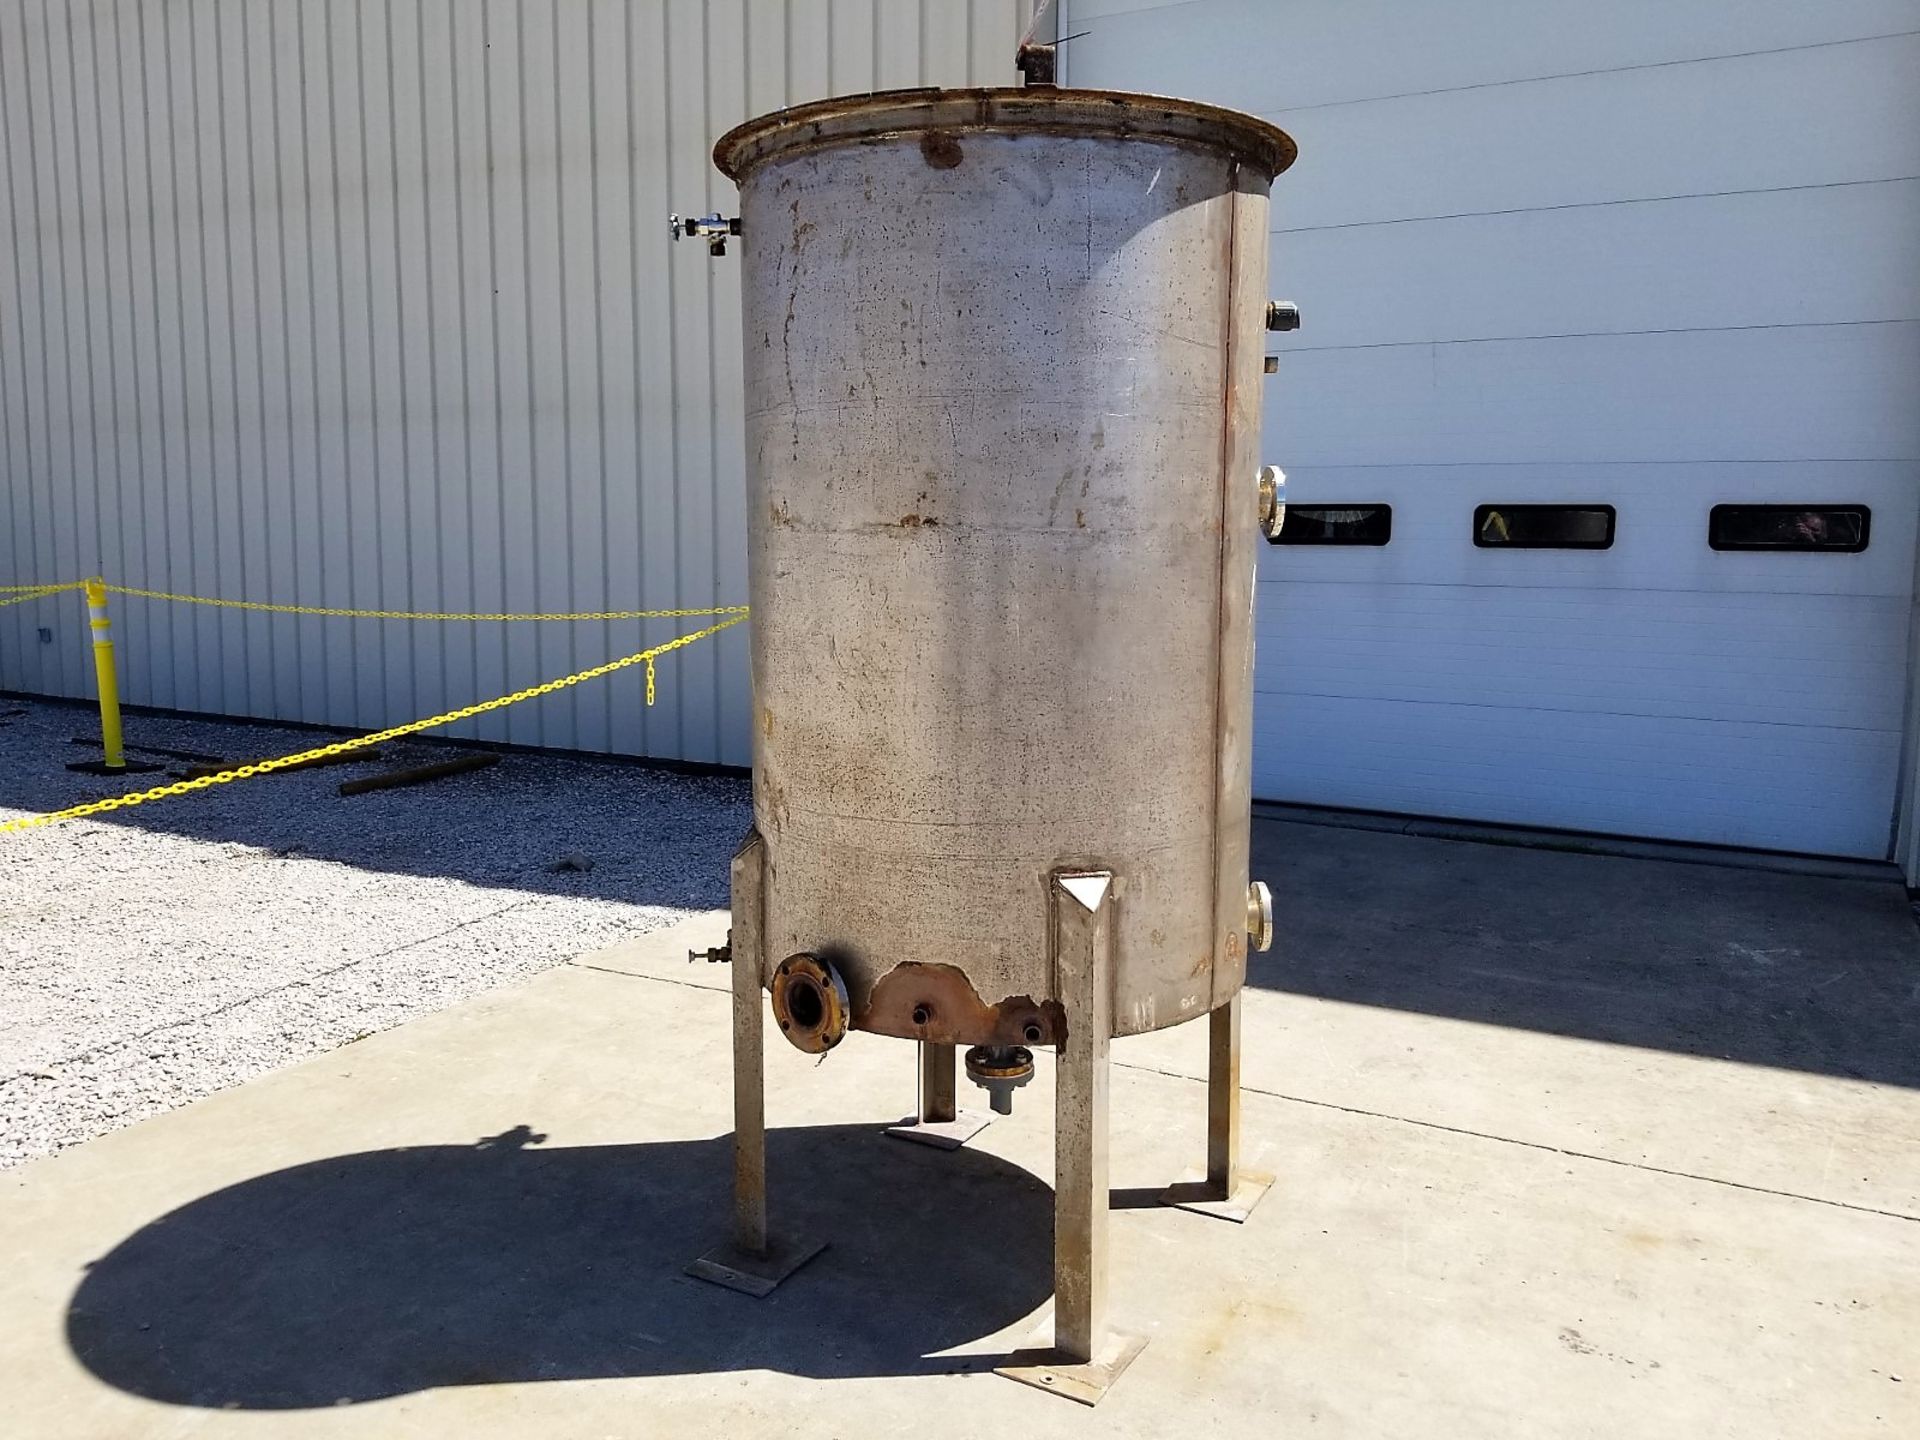 Lot Location: Greensboro NC Used 500 GALLON STAINLESS STEEL TANK with Internal Coil